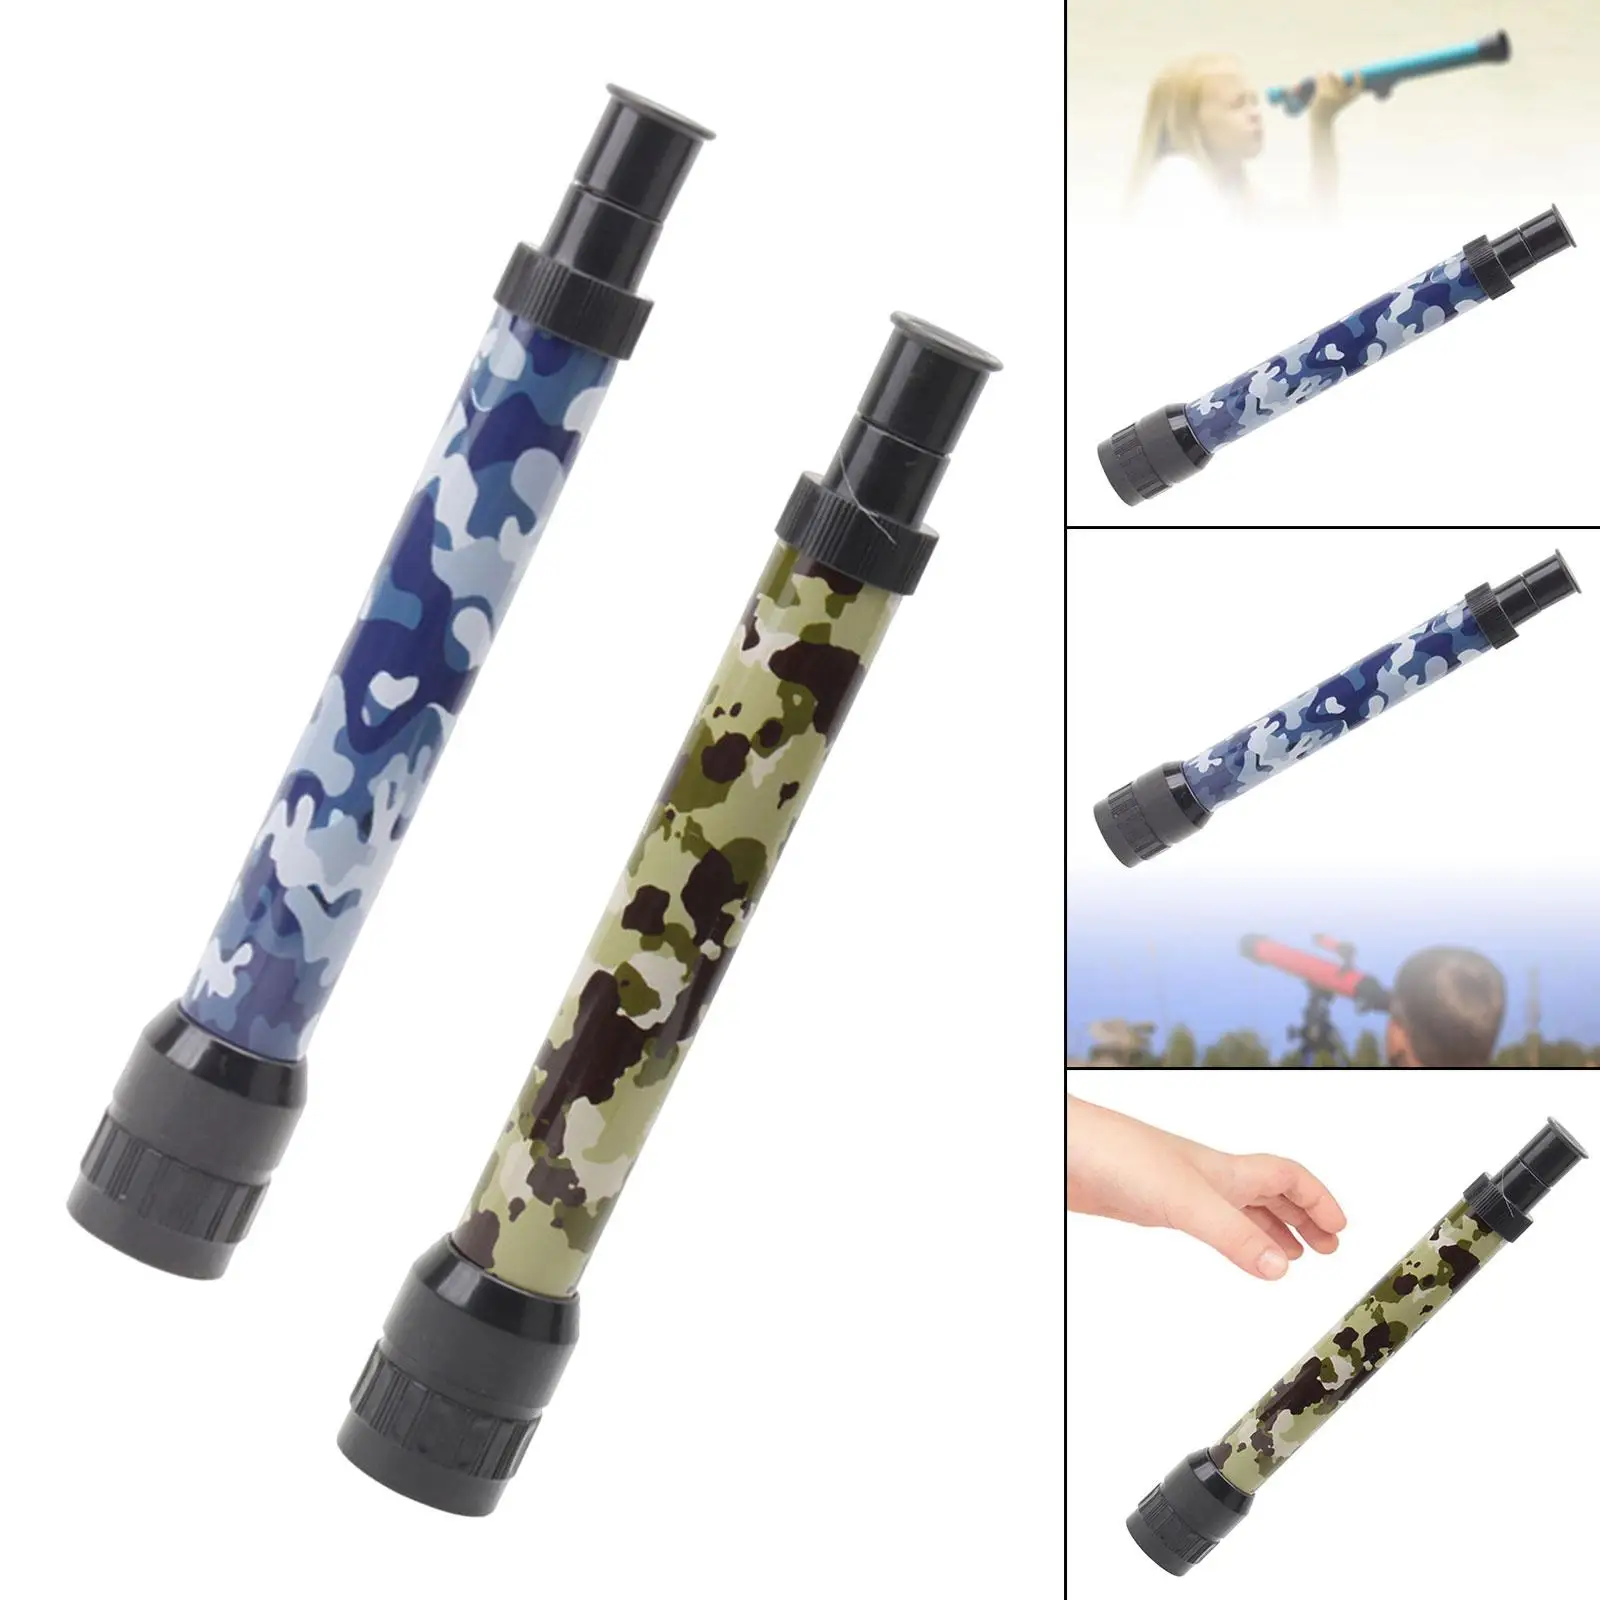 Telescopic Spyglass Portable Science Retractable Children Magnification Toy for Birthday Exploration Hiking Party Favors Hunting